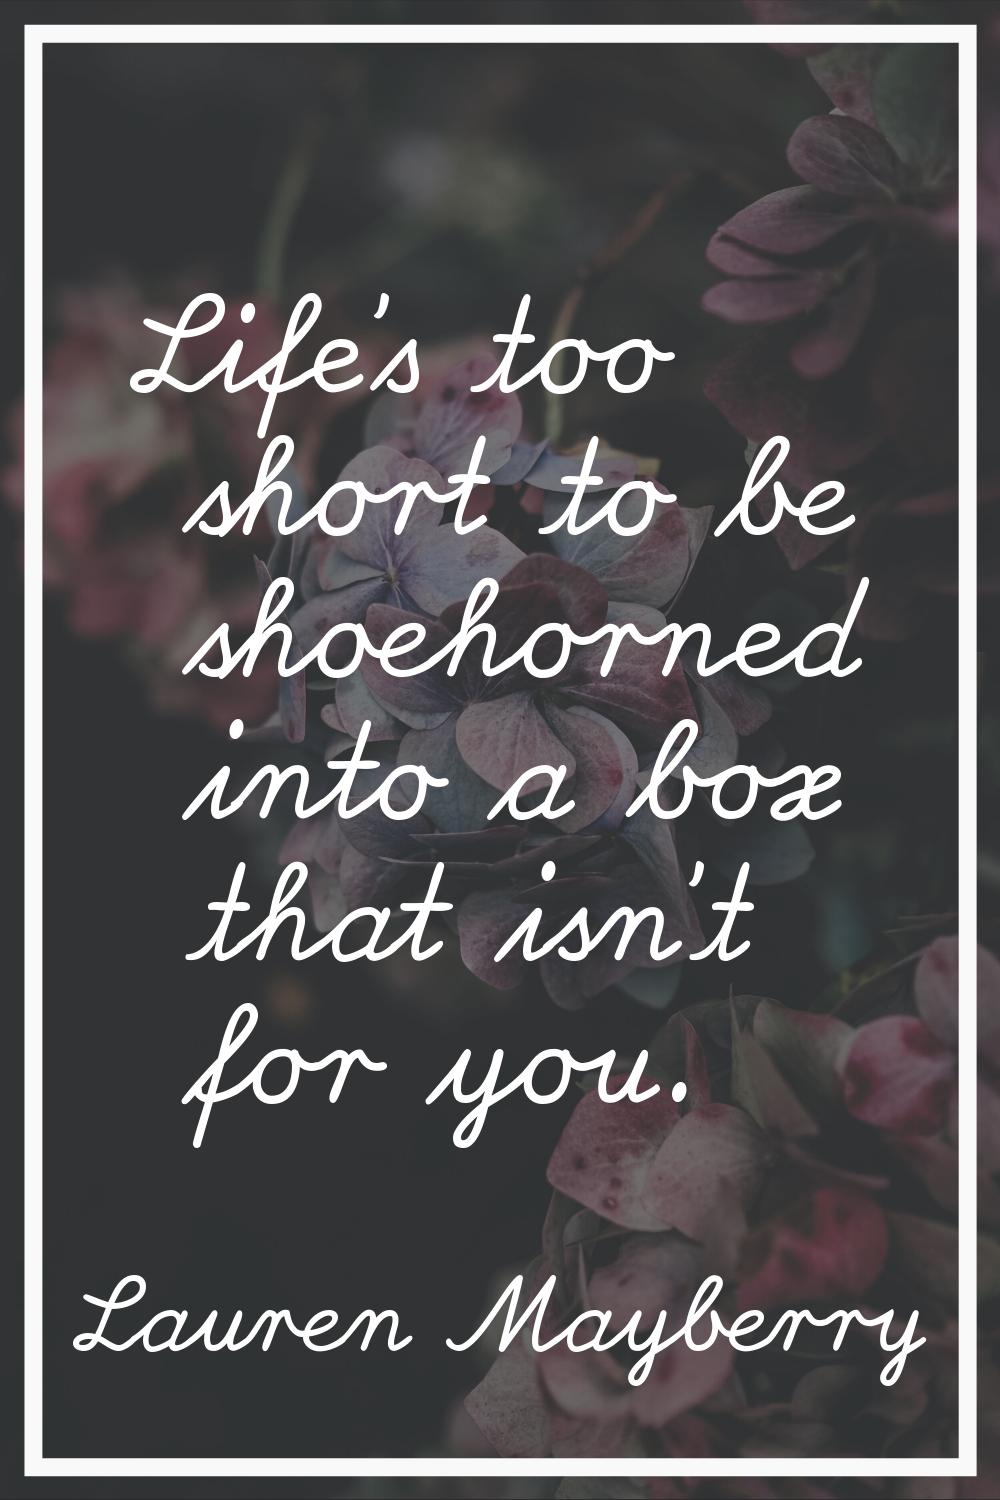 Life's too short to be shoehorned into a box that isn't for you.